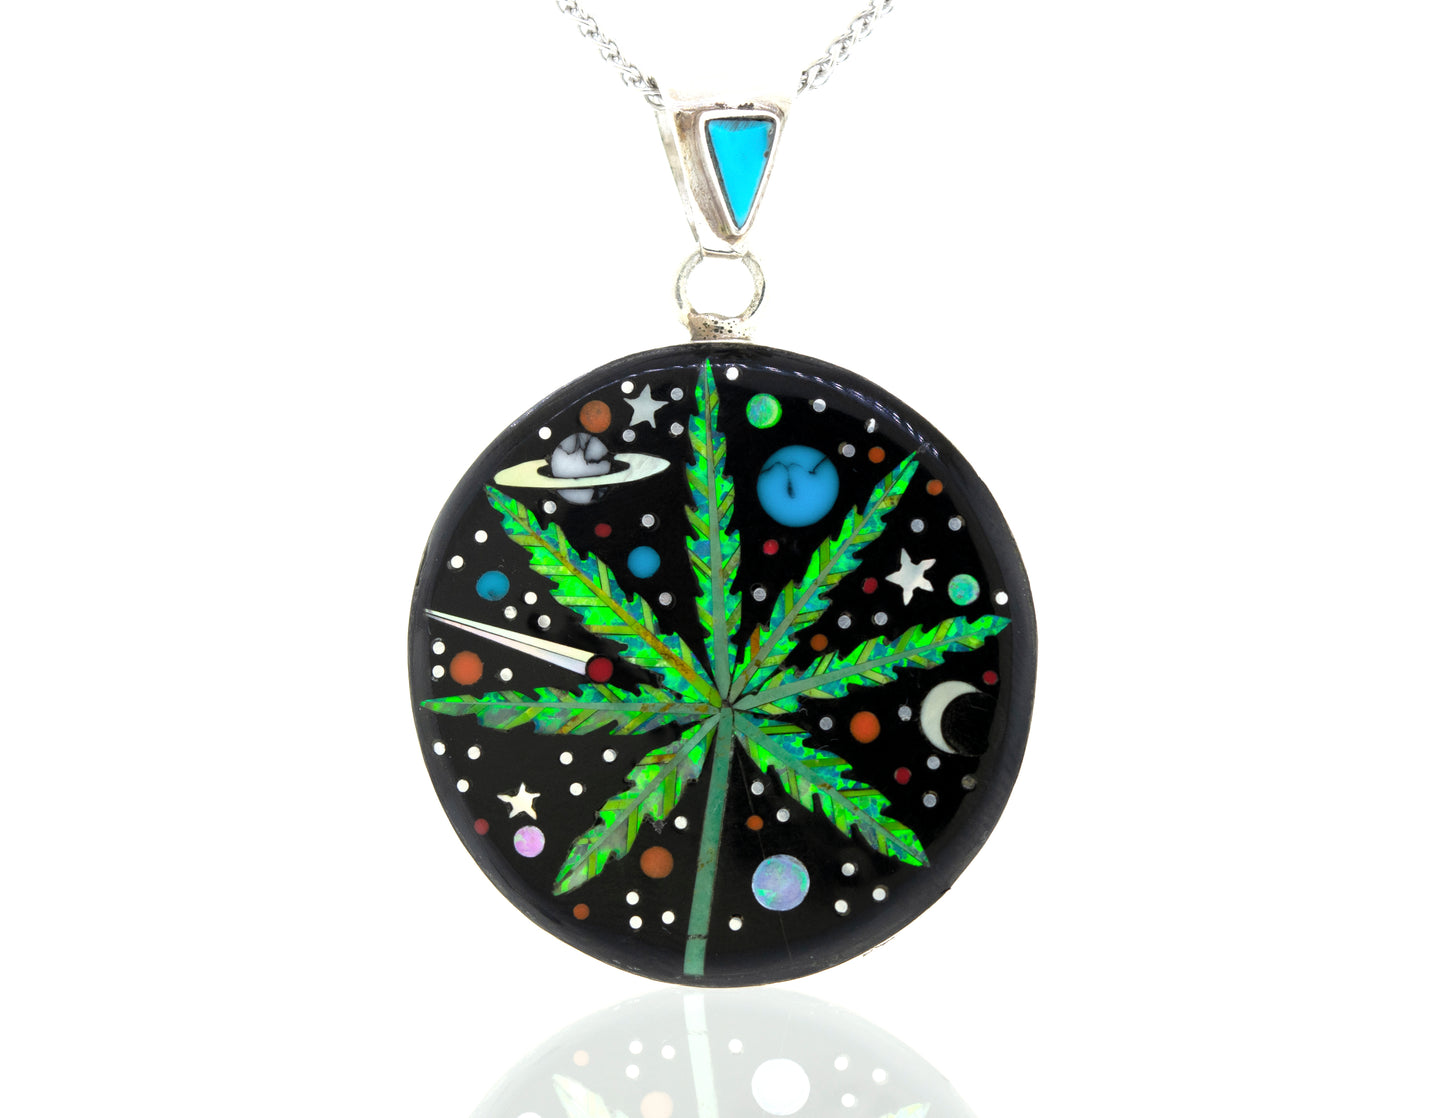 A Super Silver Handcrafted Mary Jane Outer space Pendant with a marijuana leaf design.